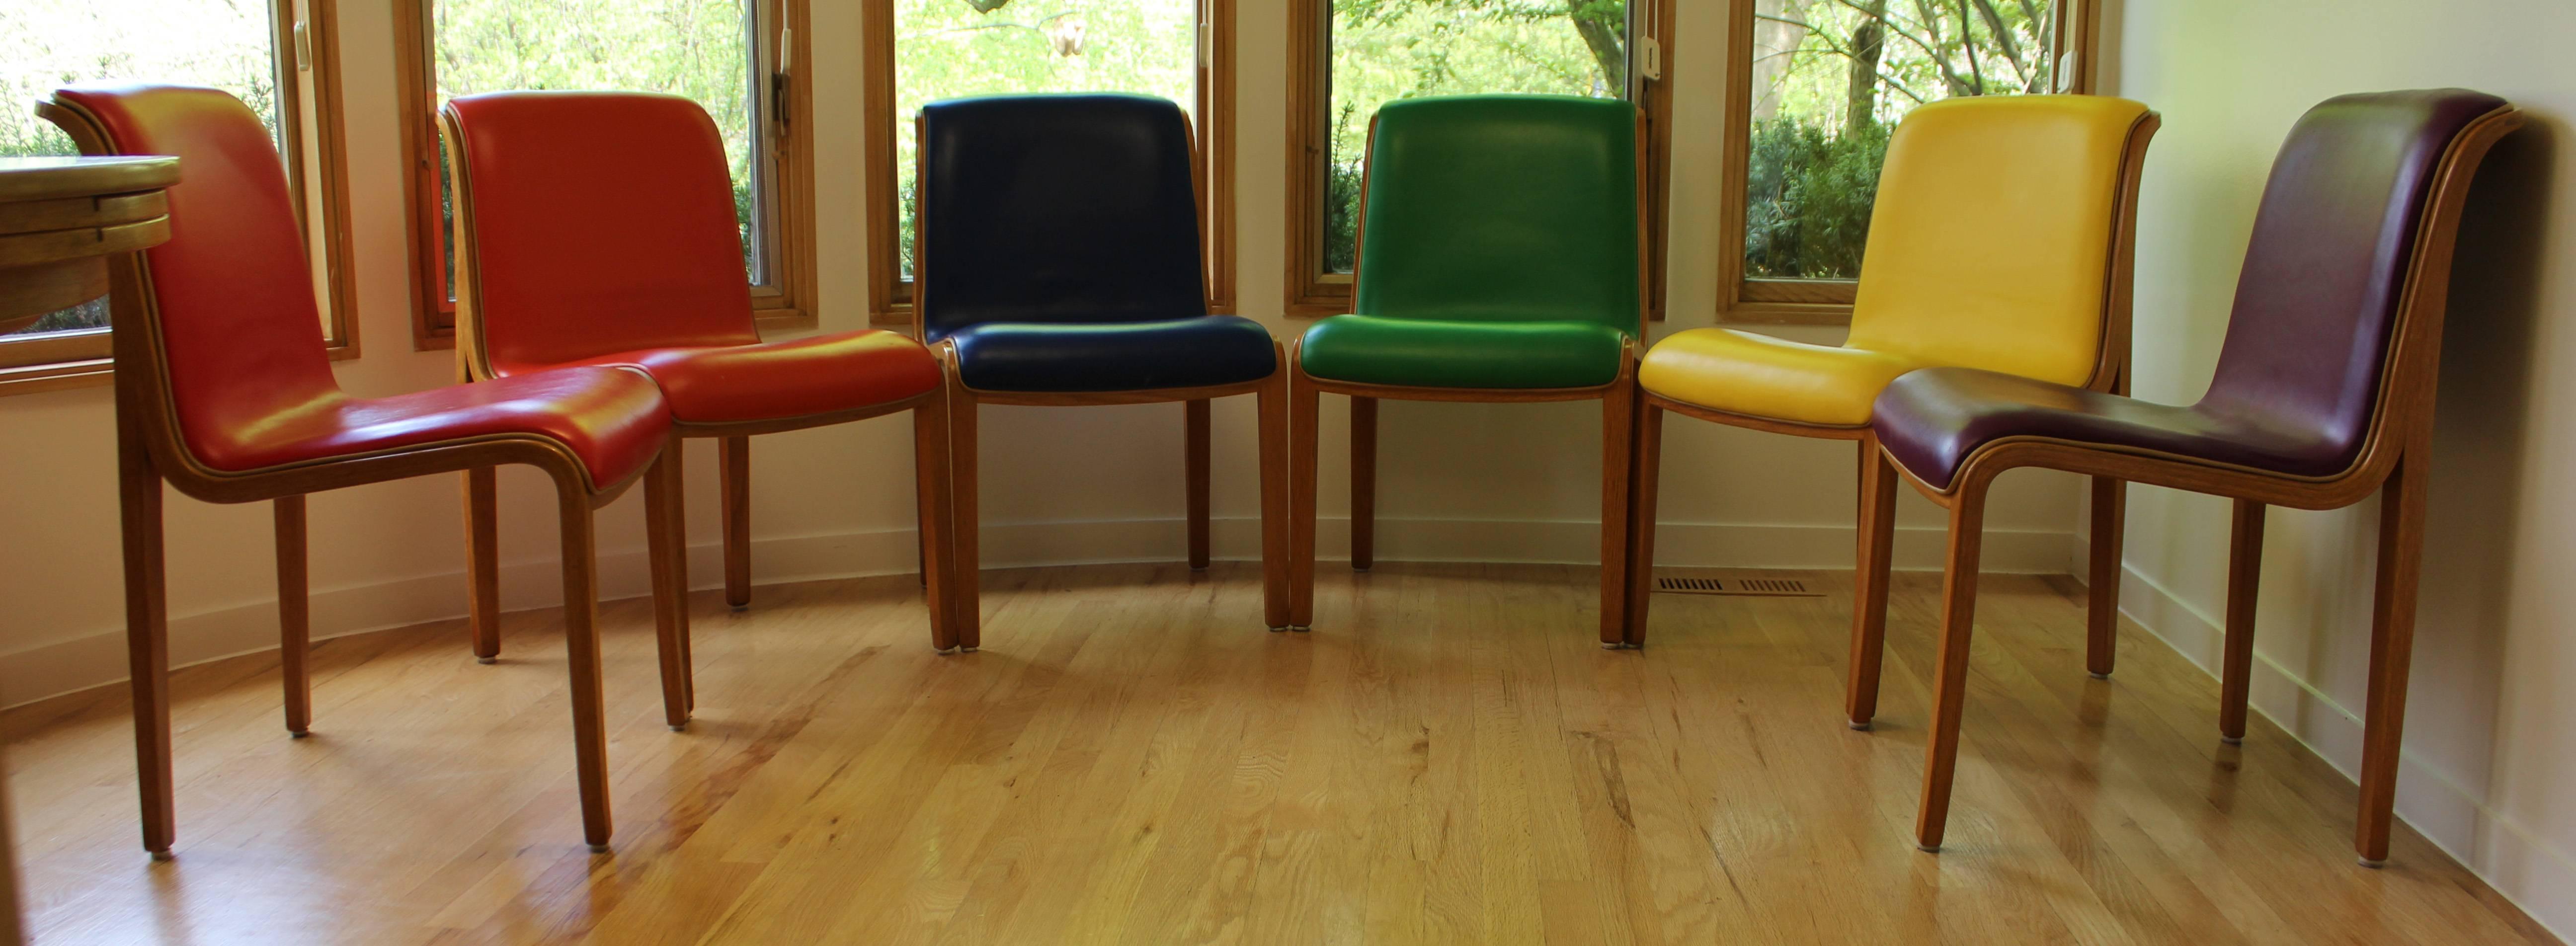 For your consideration is a funky set of six dining chairs, each seat's leather is a different color of the rainbow. In excellent condition. The dimensions are 19.5